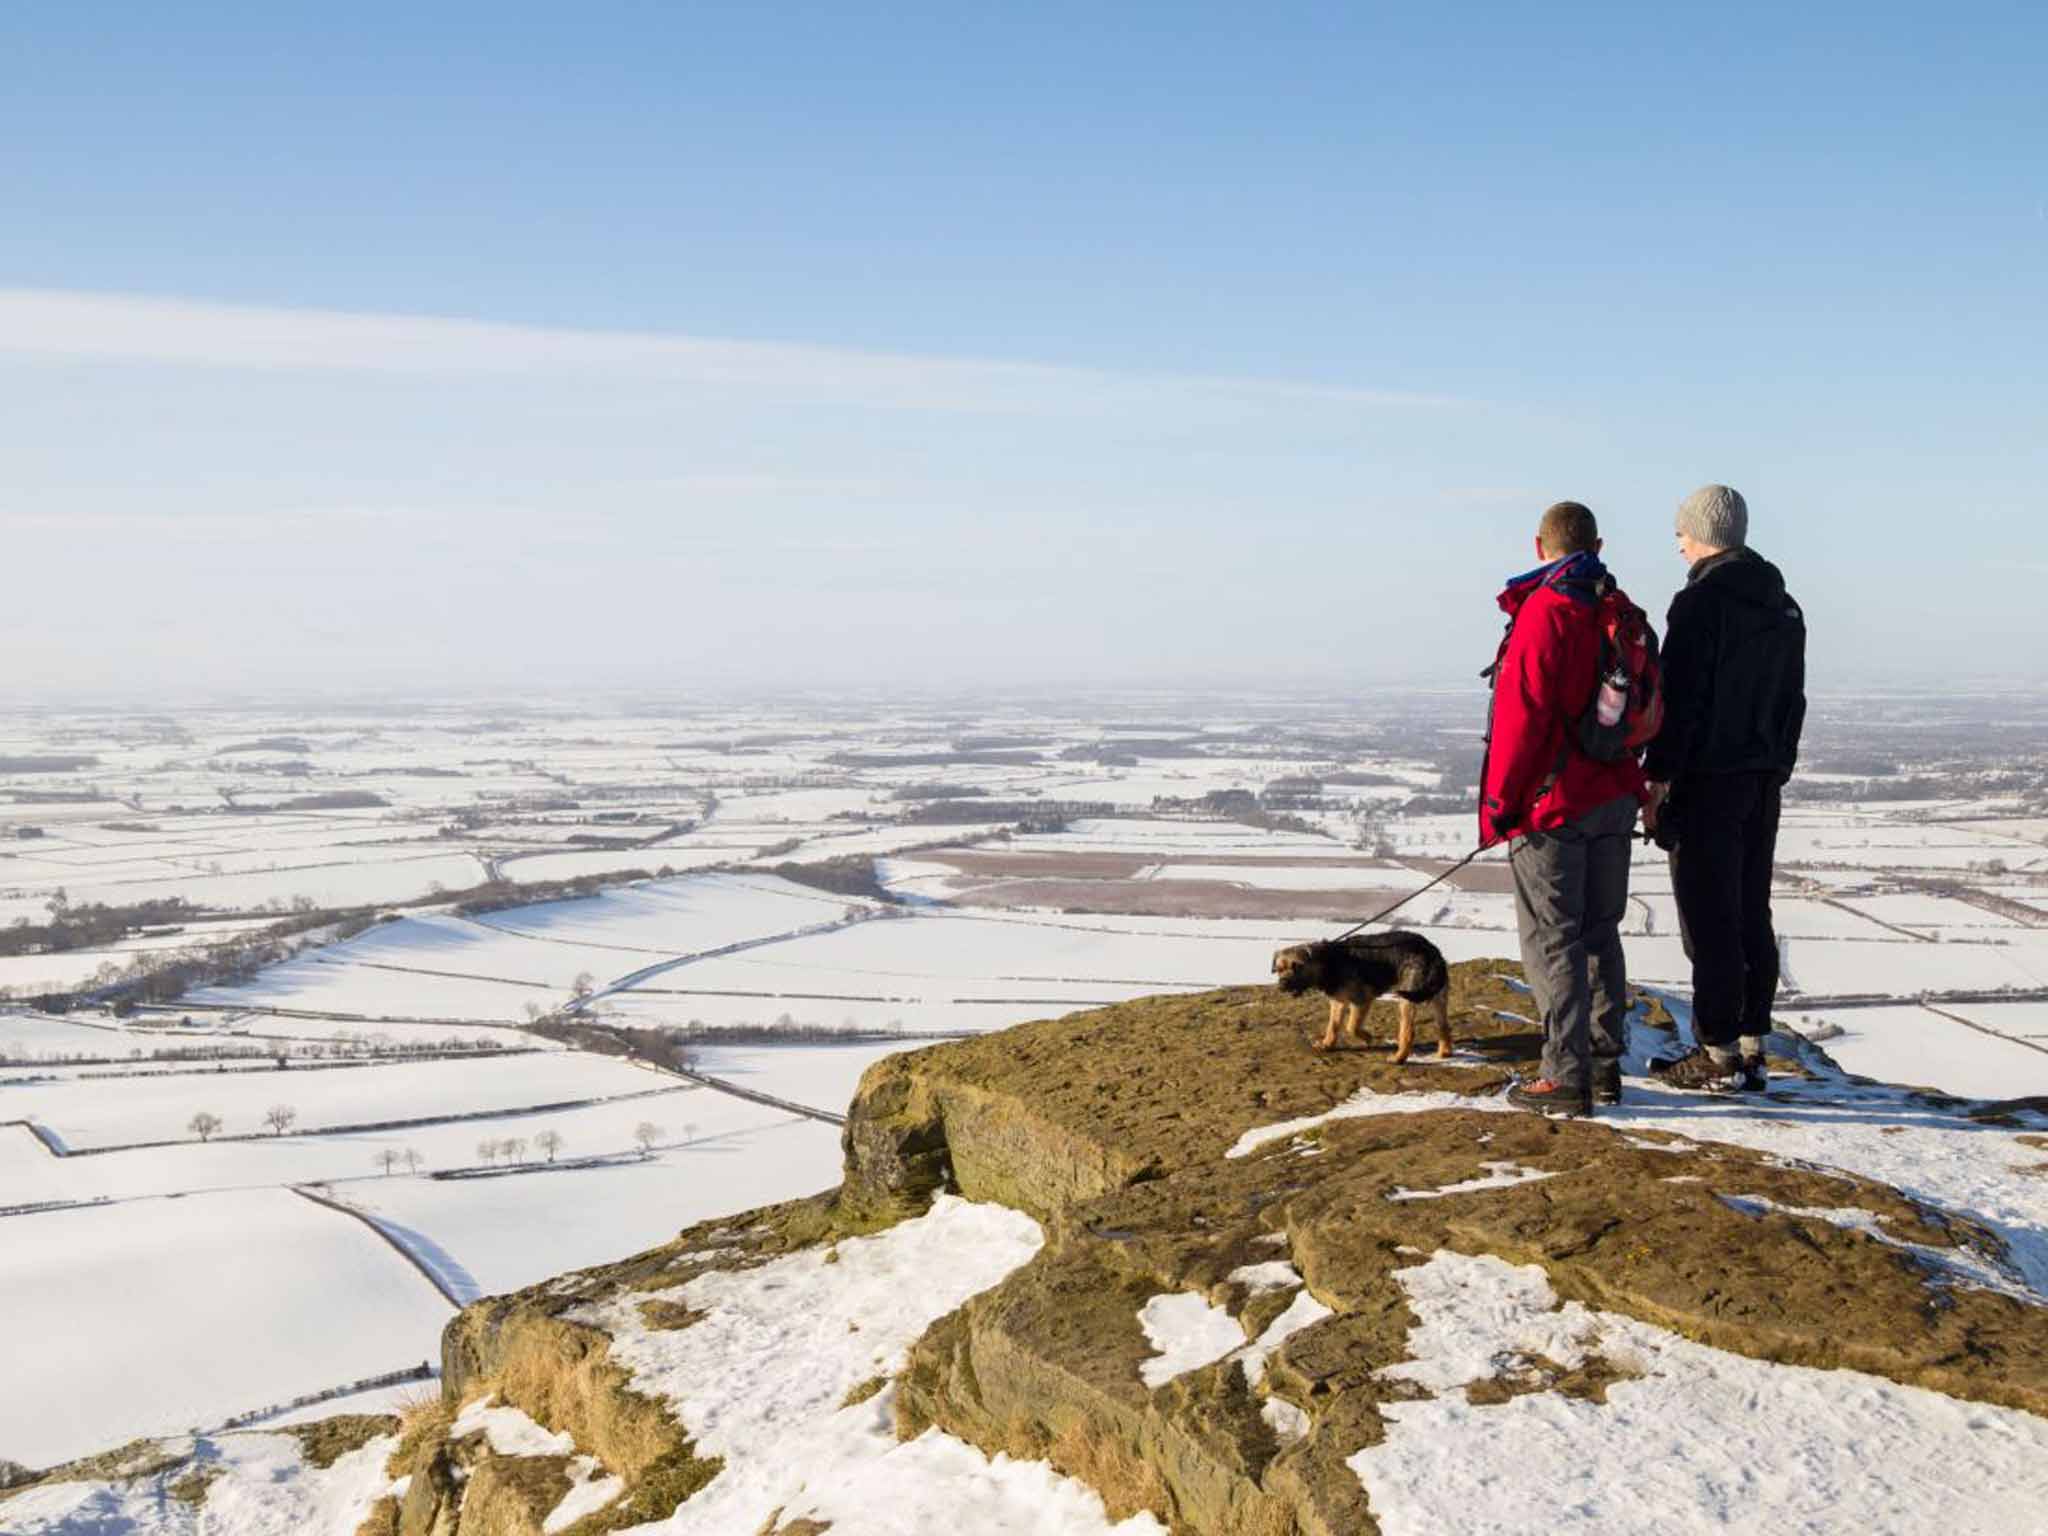 View finder: the North York Moors National Park